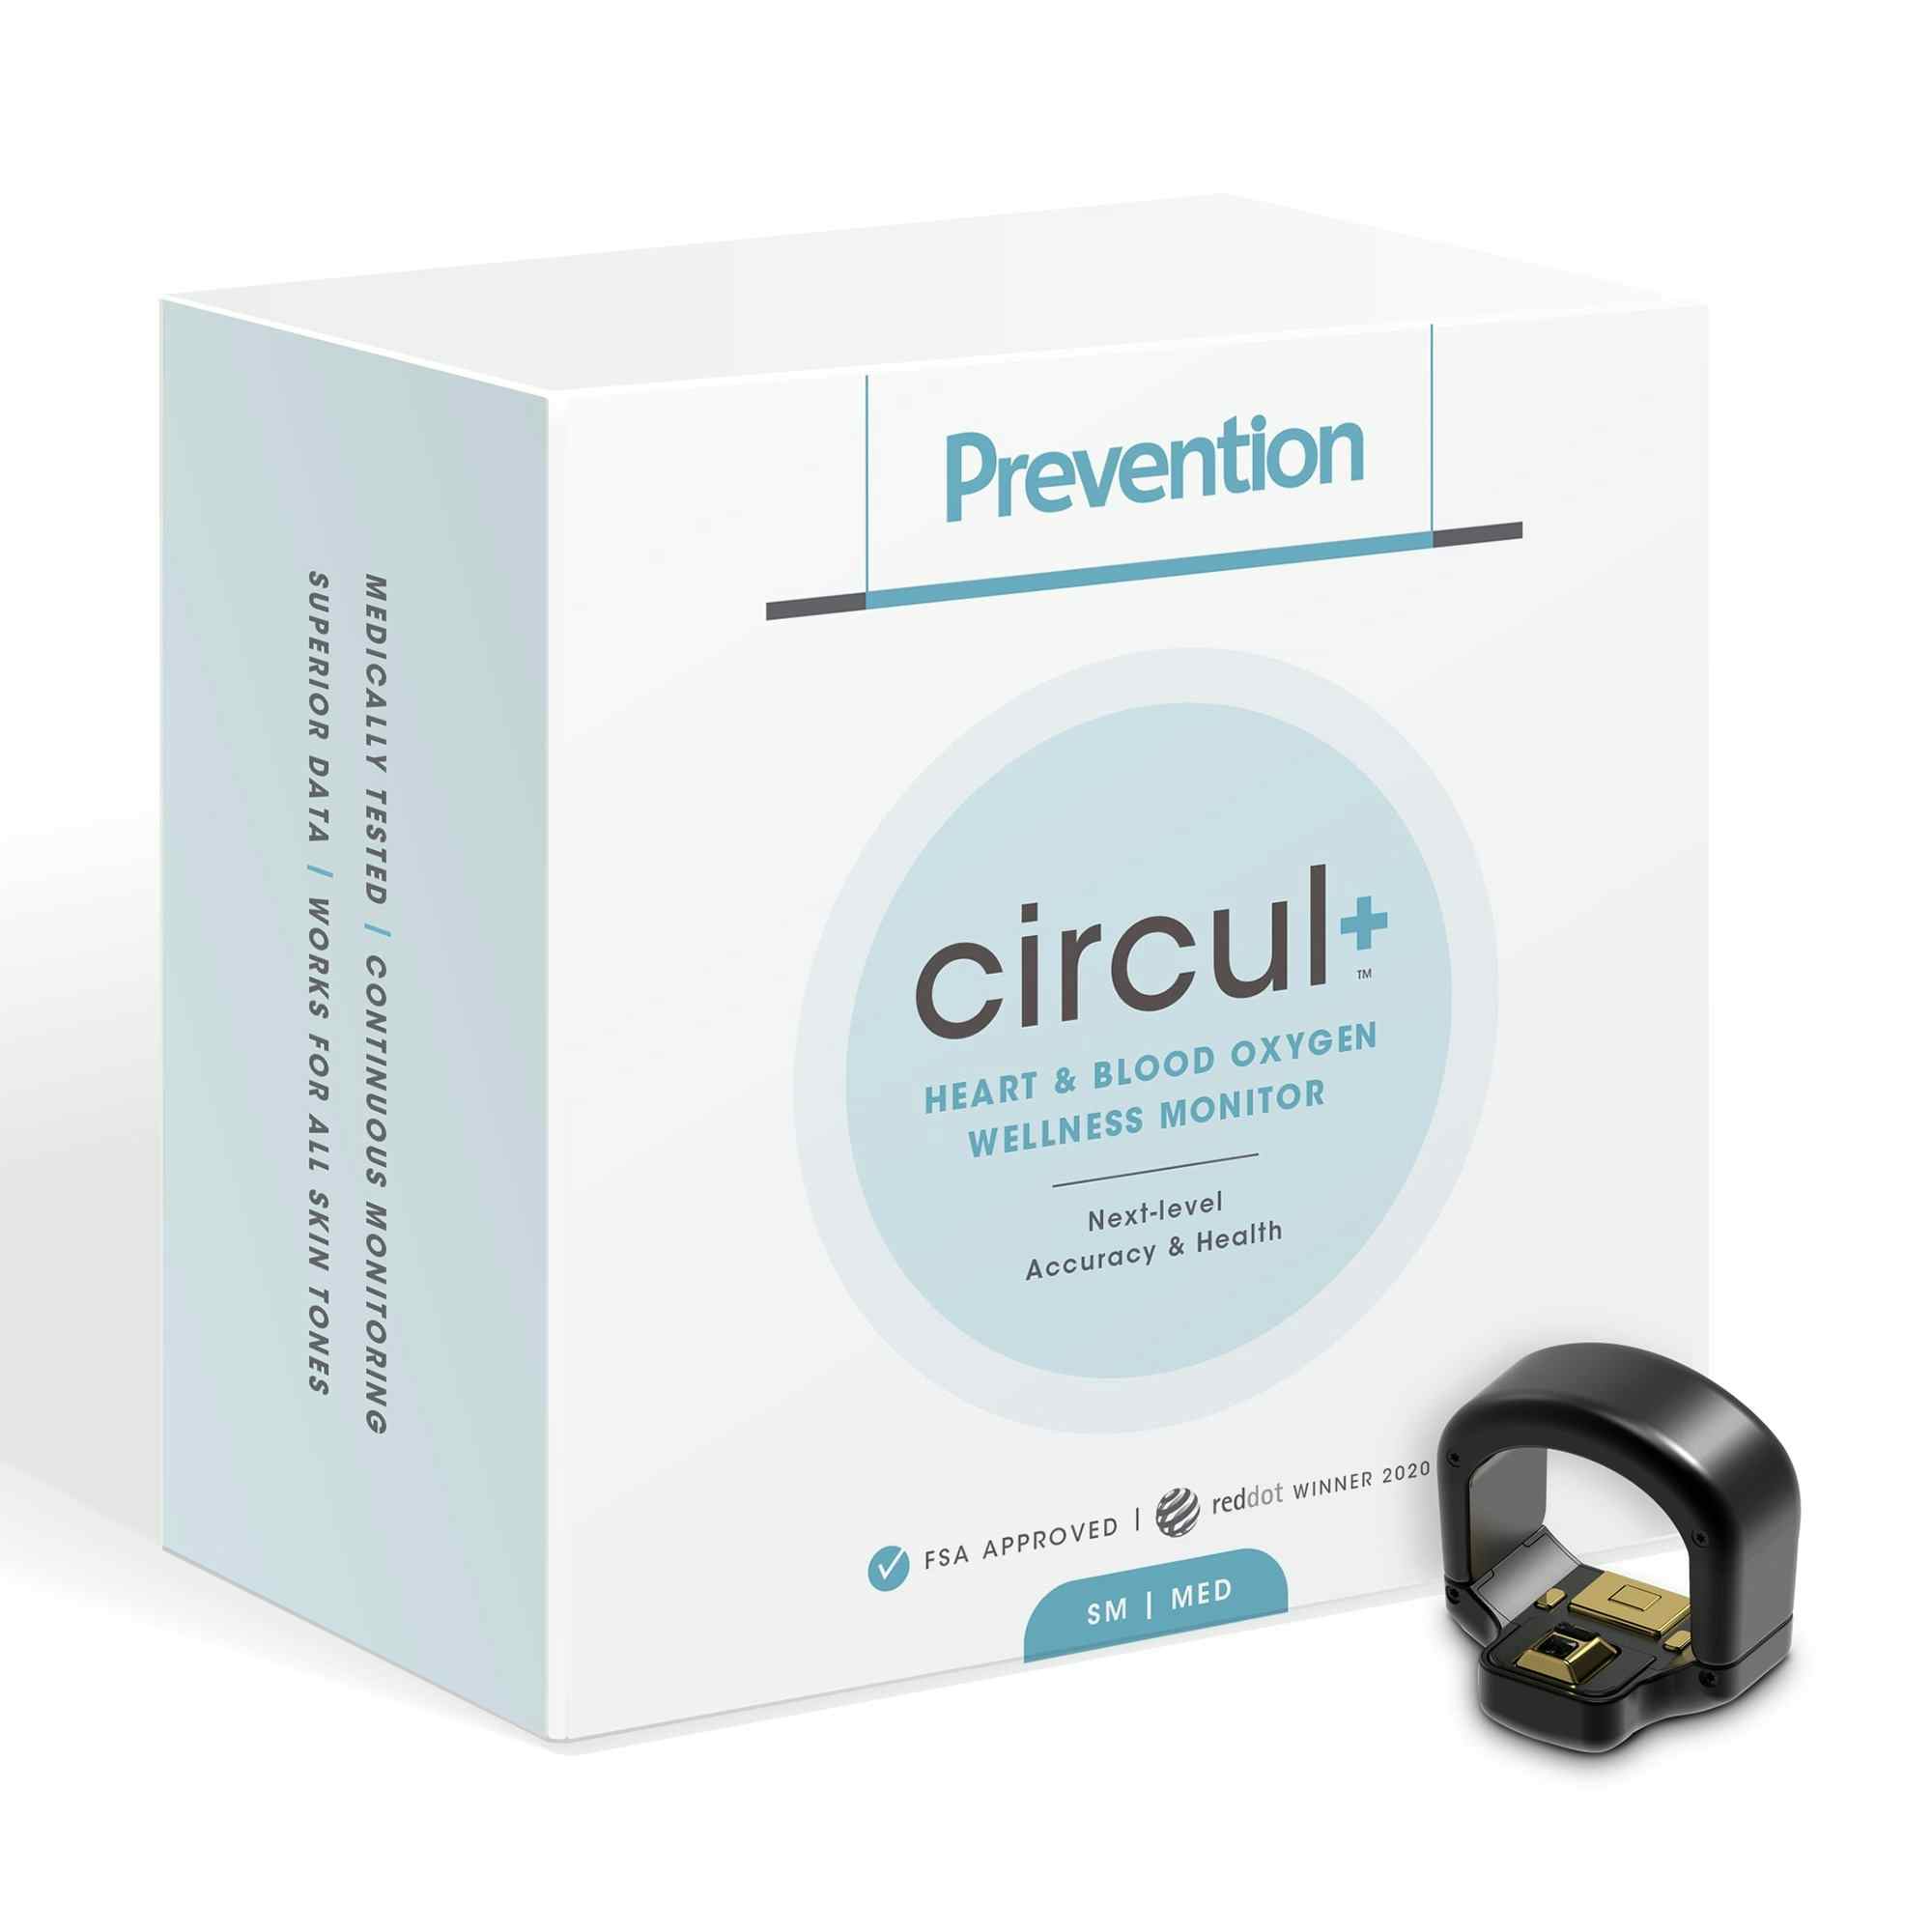 Prevention circul+ Heart and Blood Oxygen Wellness Monitor, O2-88-S, Small ( 5 - 9) - 1 Each